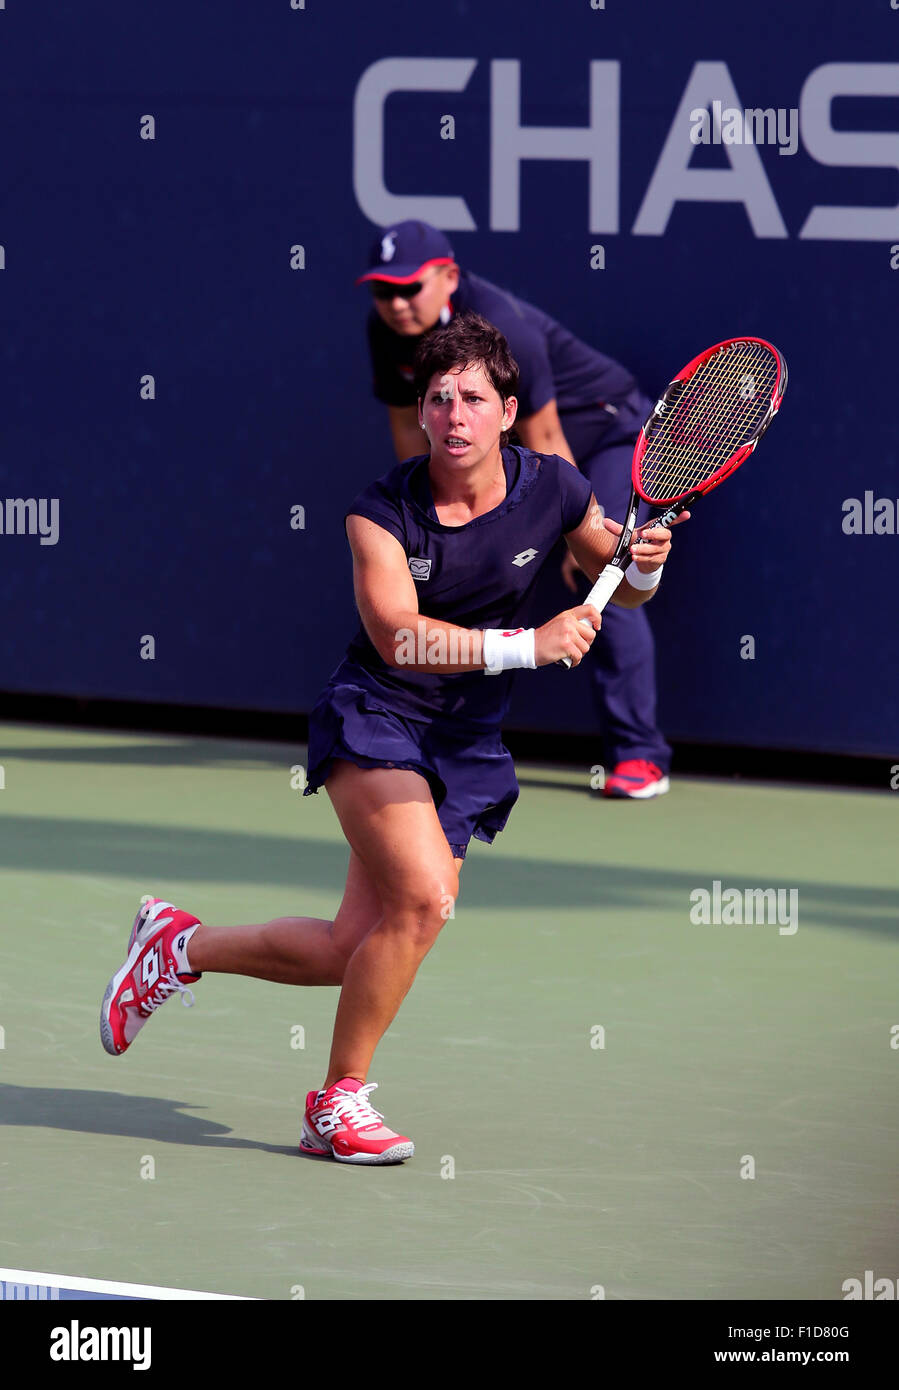 Spain's Carla Suarez Navarro, the number 10 seed, runs down a backhand against Czeckeslovakia's Denisa Allertova during the first round of the U.S. Open in Flushing Meadows, New York on Monday, August 31st.  Allertova won the match. Stock Photo